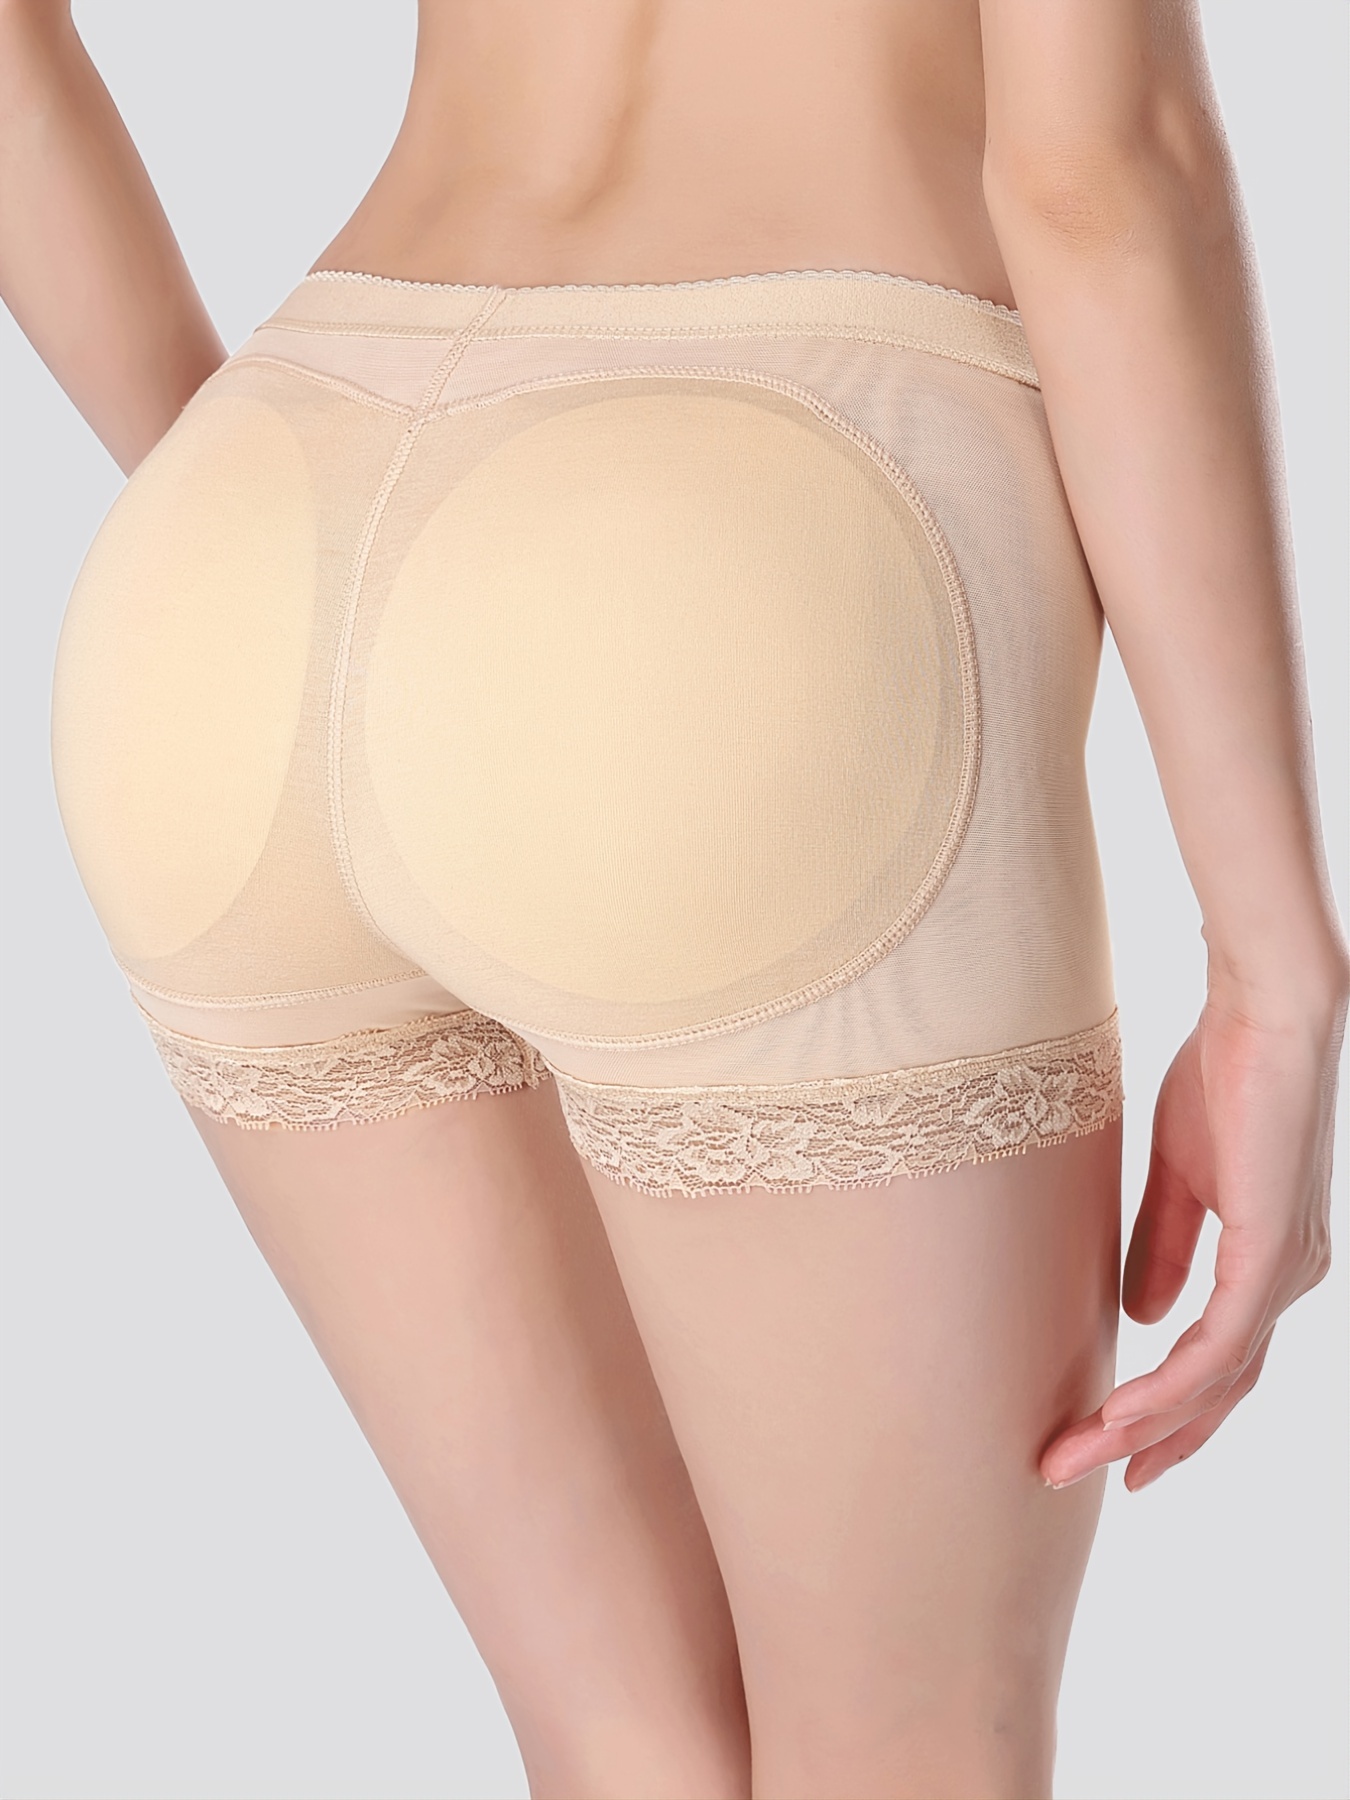 Comfortable & Soft Panties With Padded Buttocks, High Waist Lace Mesh  Seamless Shorts Control Panties, High Coverage Women's Underwear & Lingerie